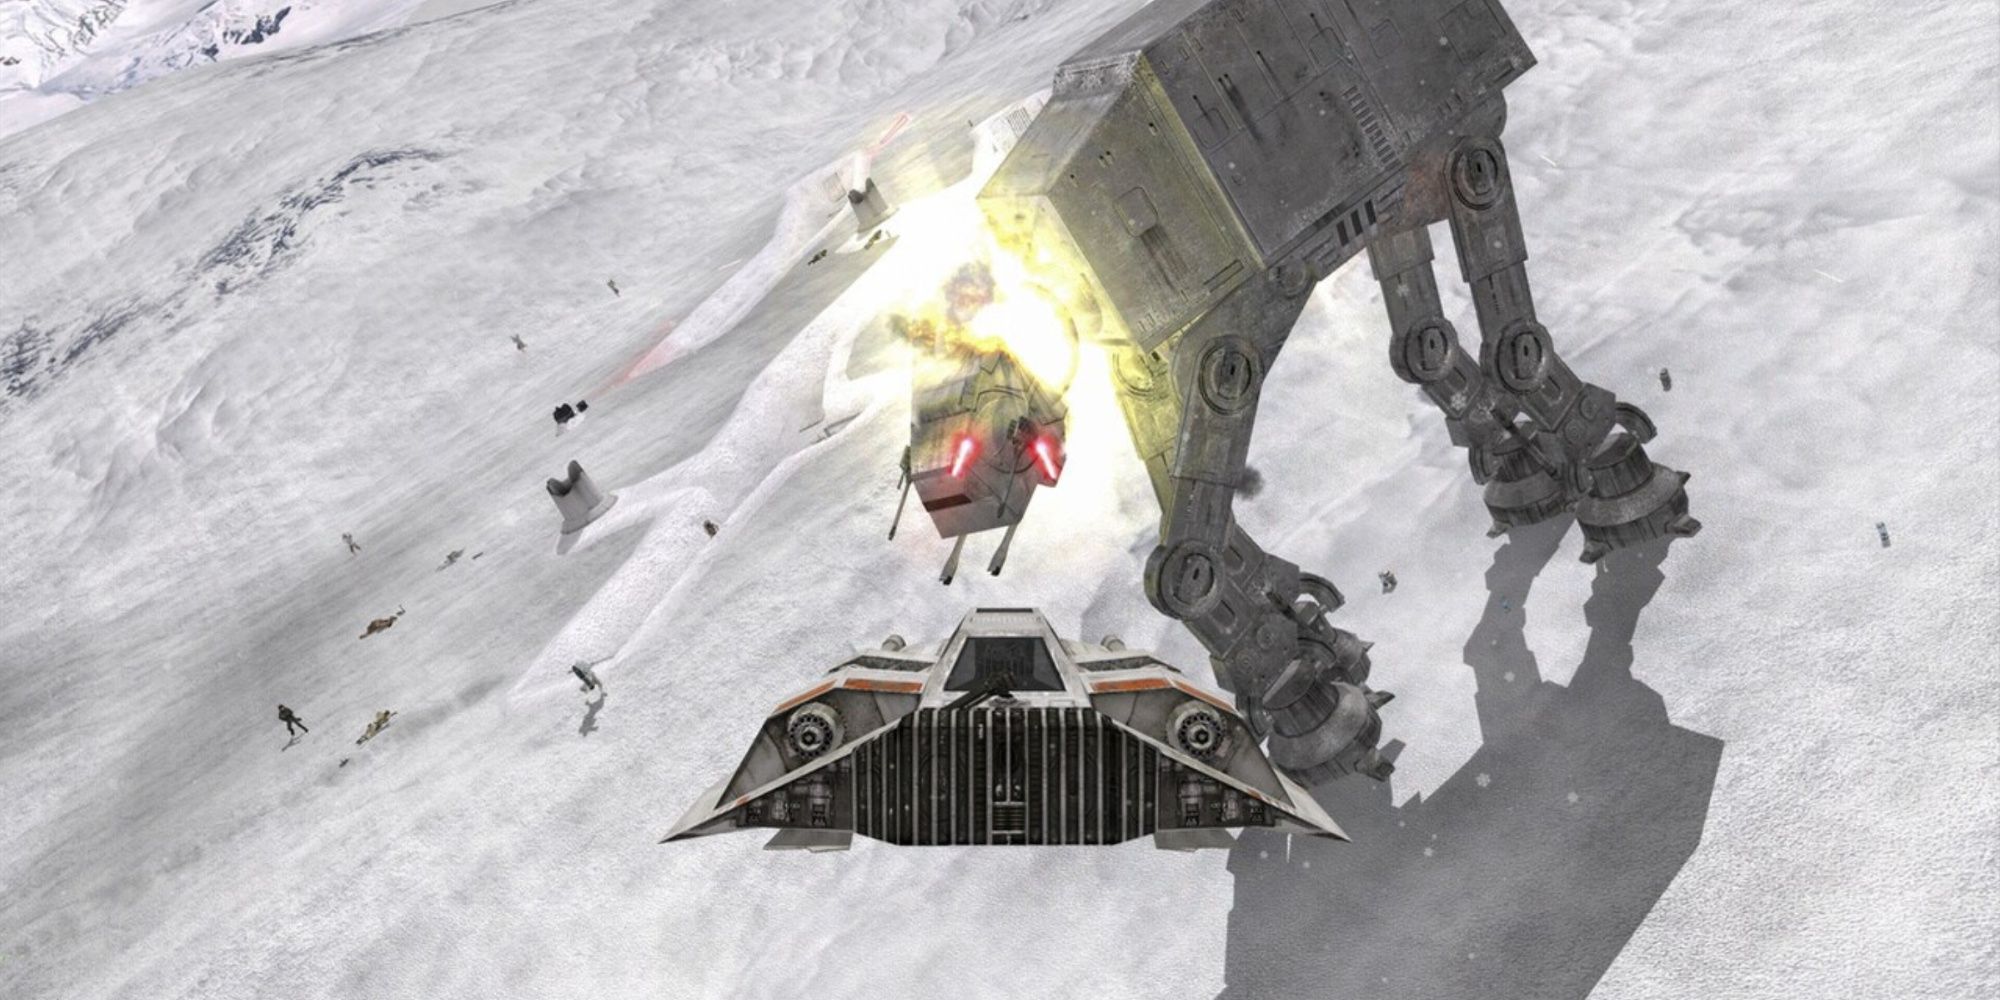 star wars fighter taking down an at-at